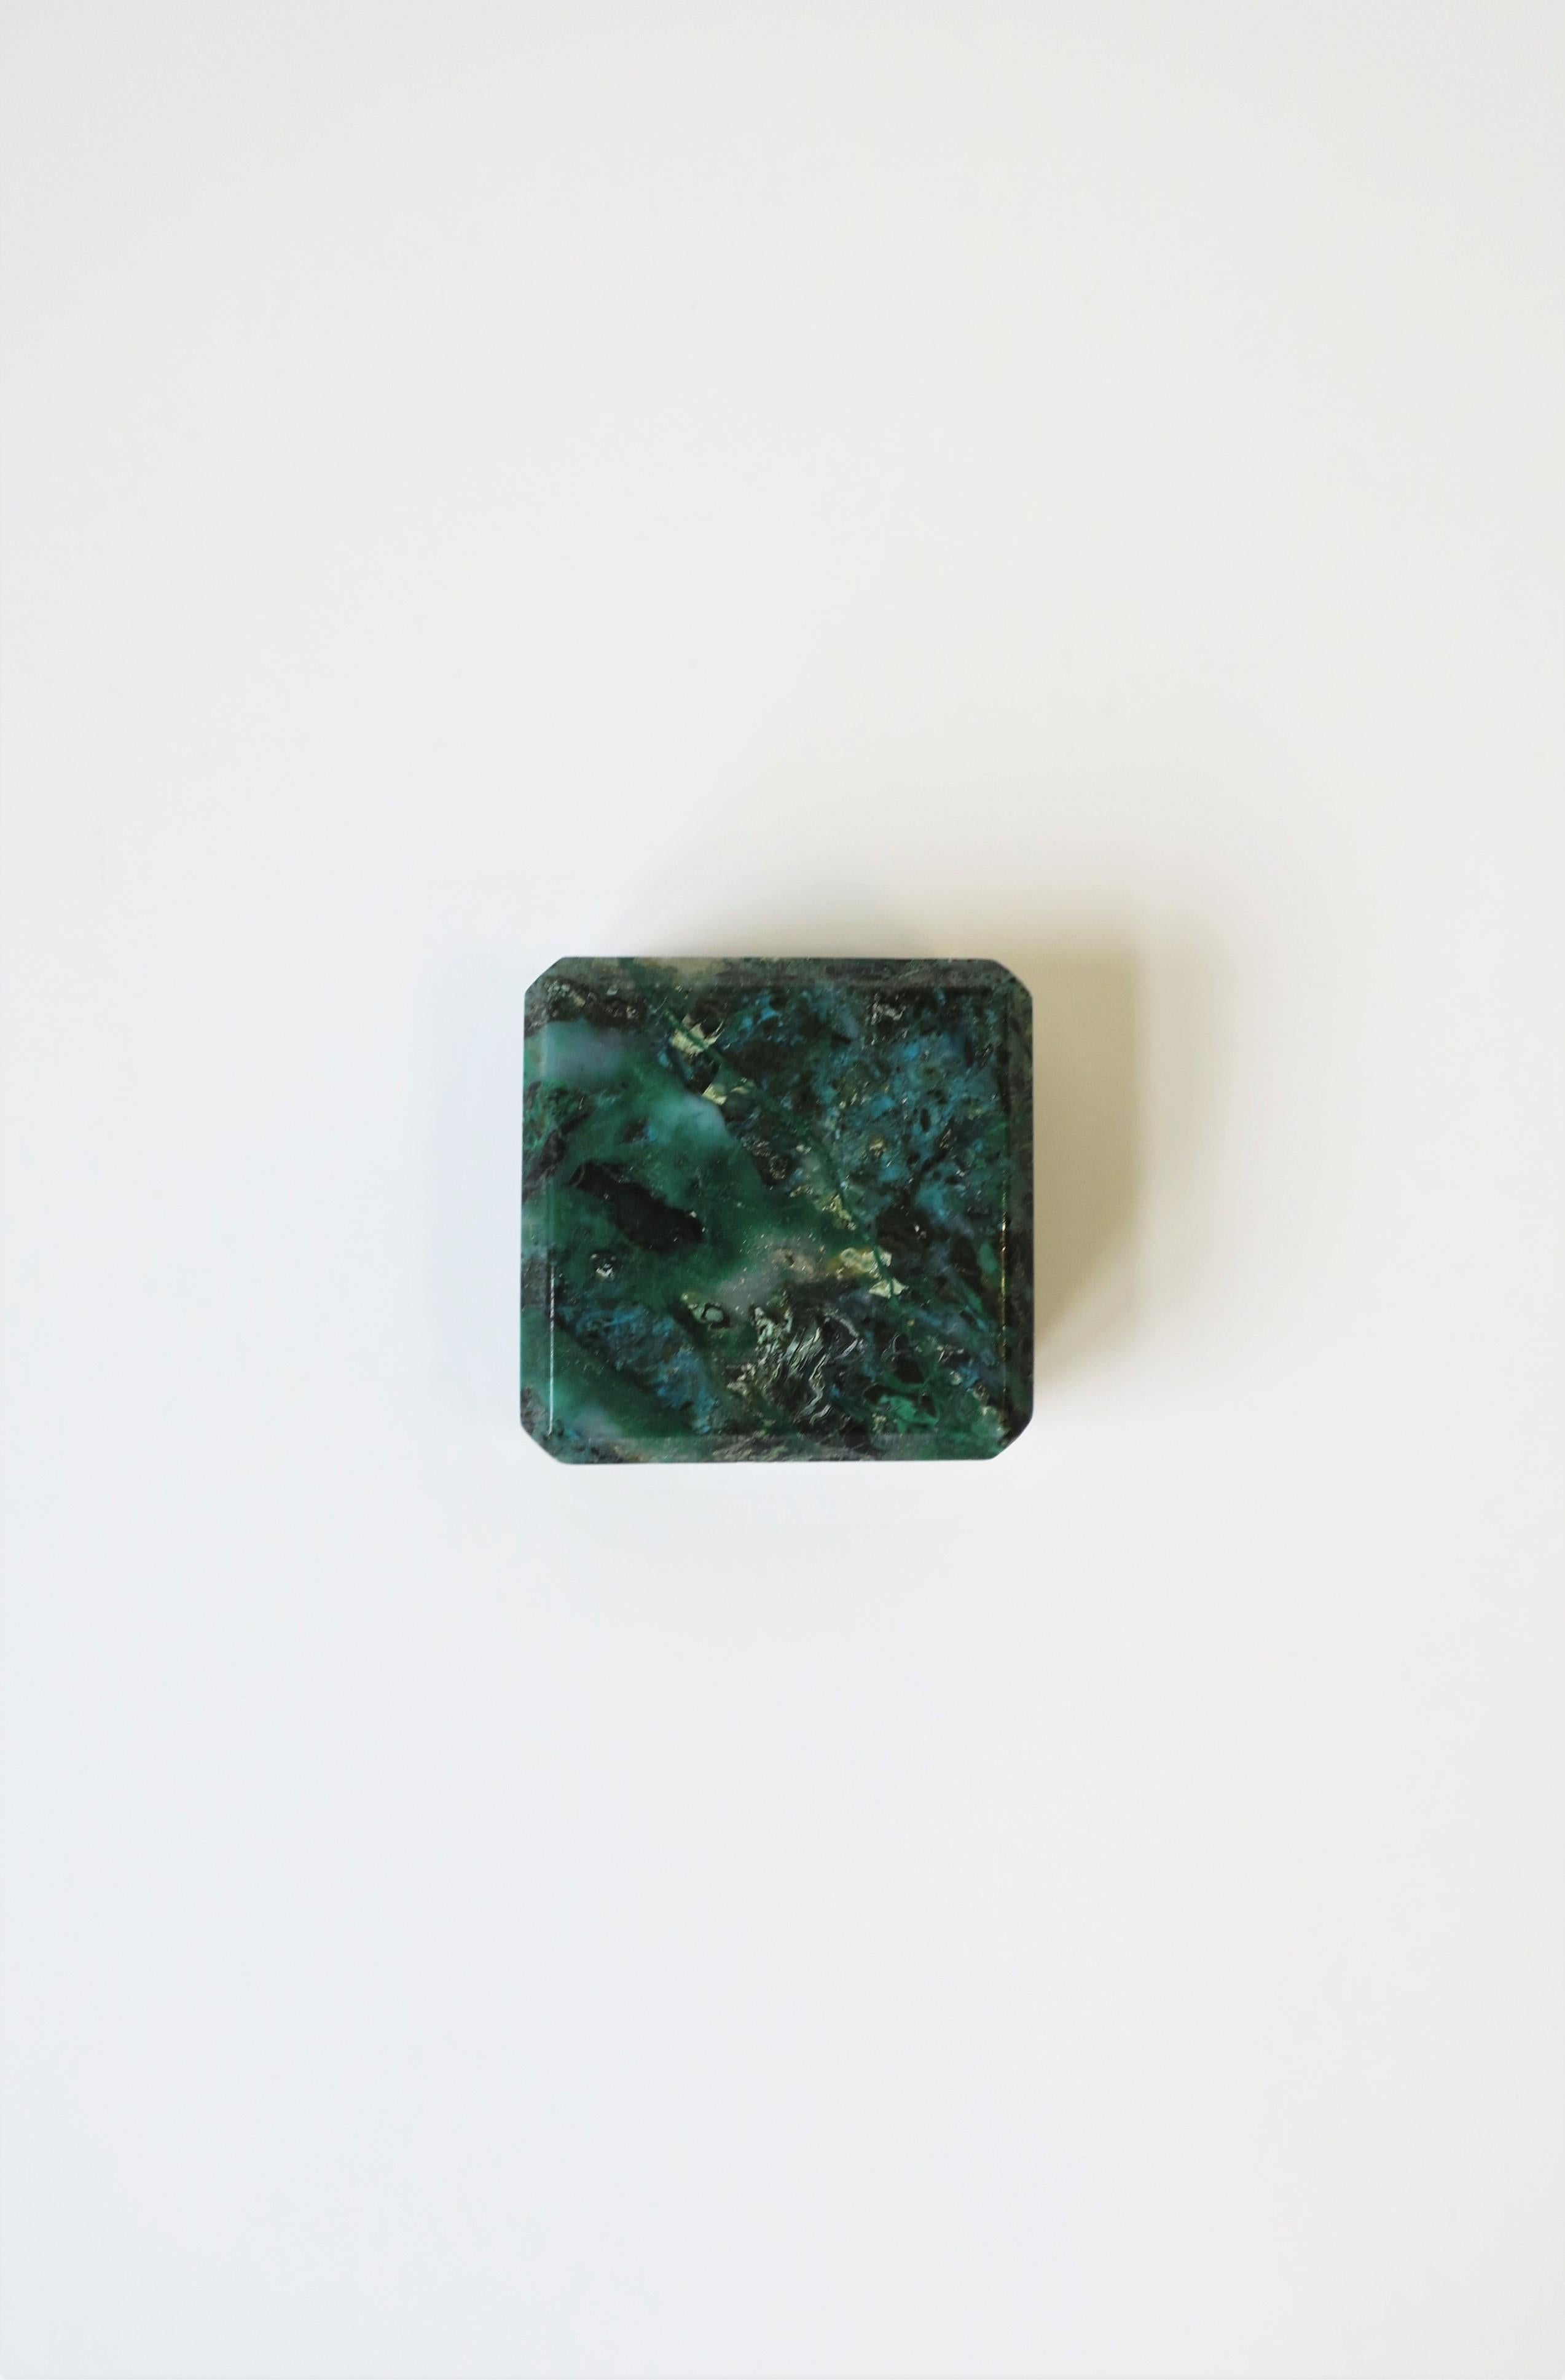 Emerald Green and Blue Gem Cut Stone Object or Paperweight 3